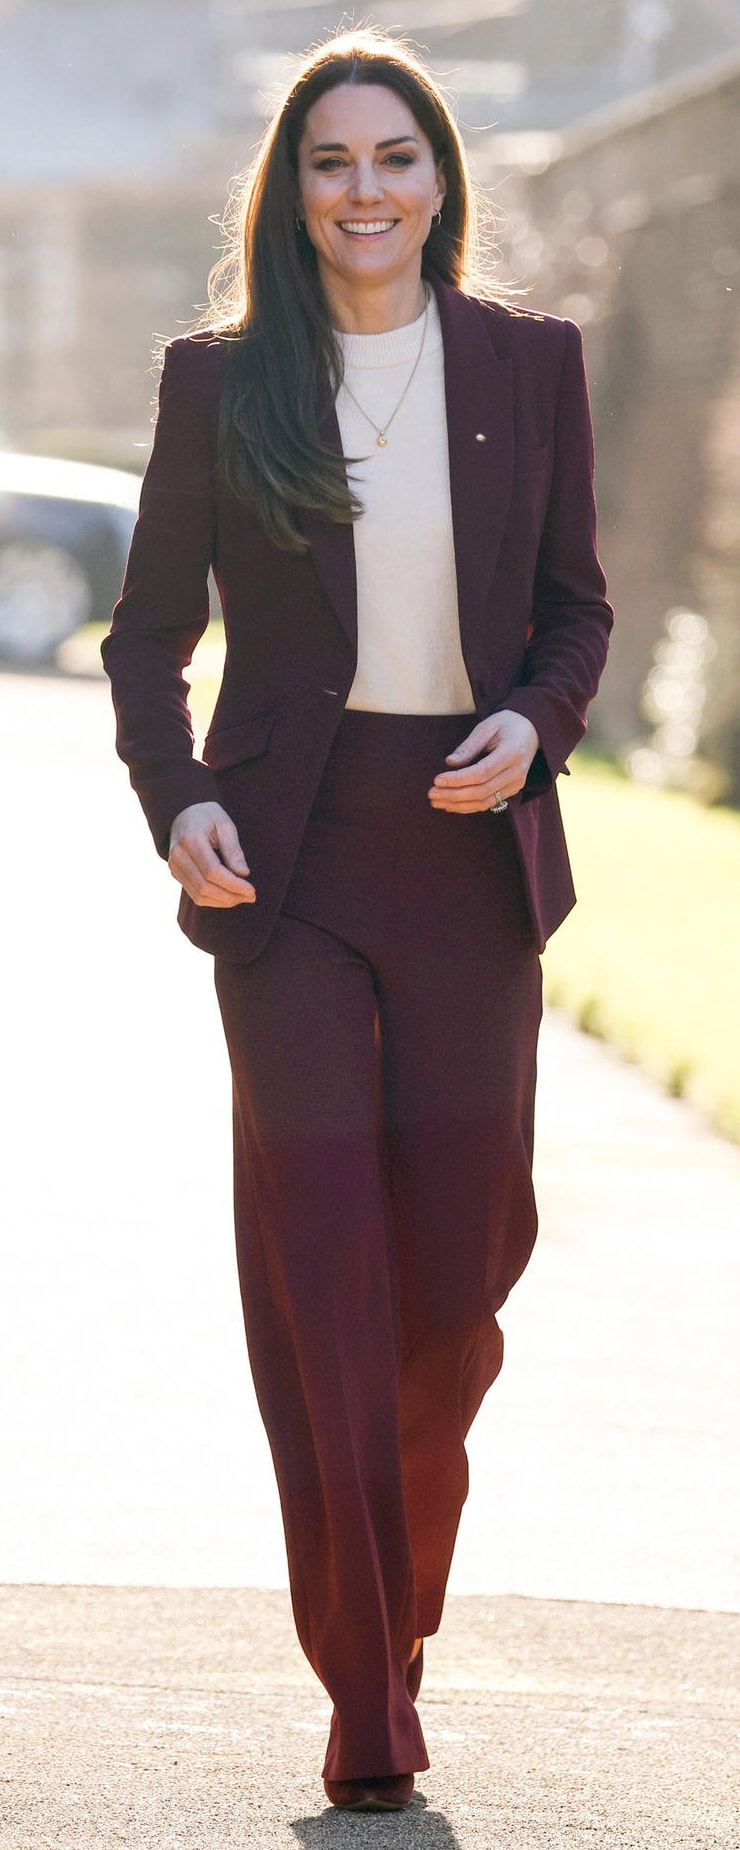 Roland Mouret Single-Breasted Stretch-Cady Blazer in Maroon - Kate